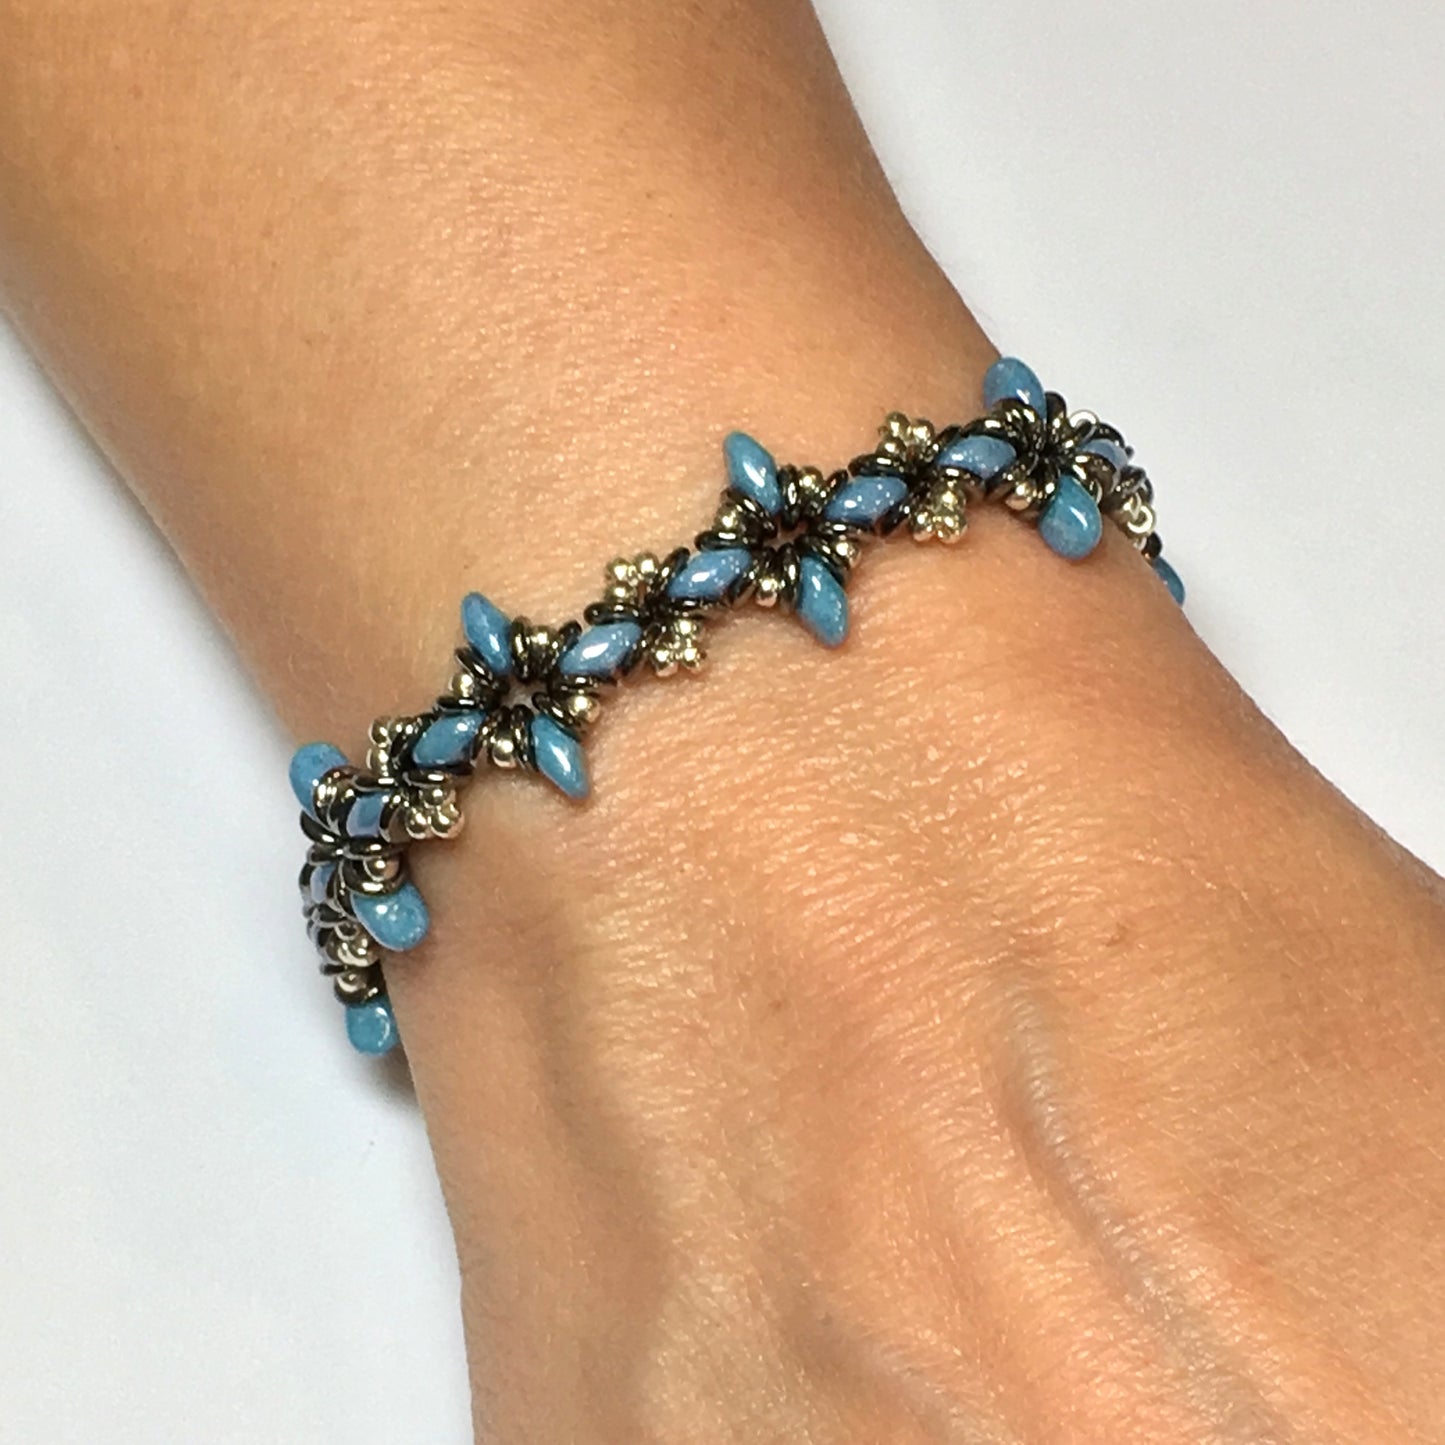 Bead Kit to Make "Oh, My Stars! Bracelet" Blue Luster/ Silver / Jet Full Chrome with Free Tutorial starting at $9.99